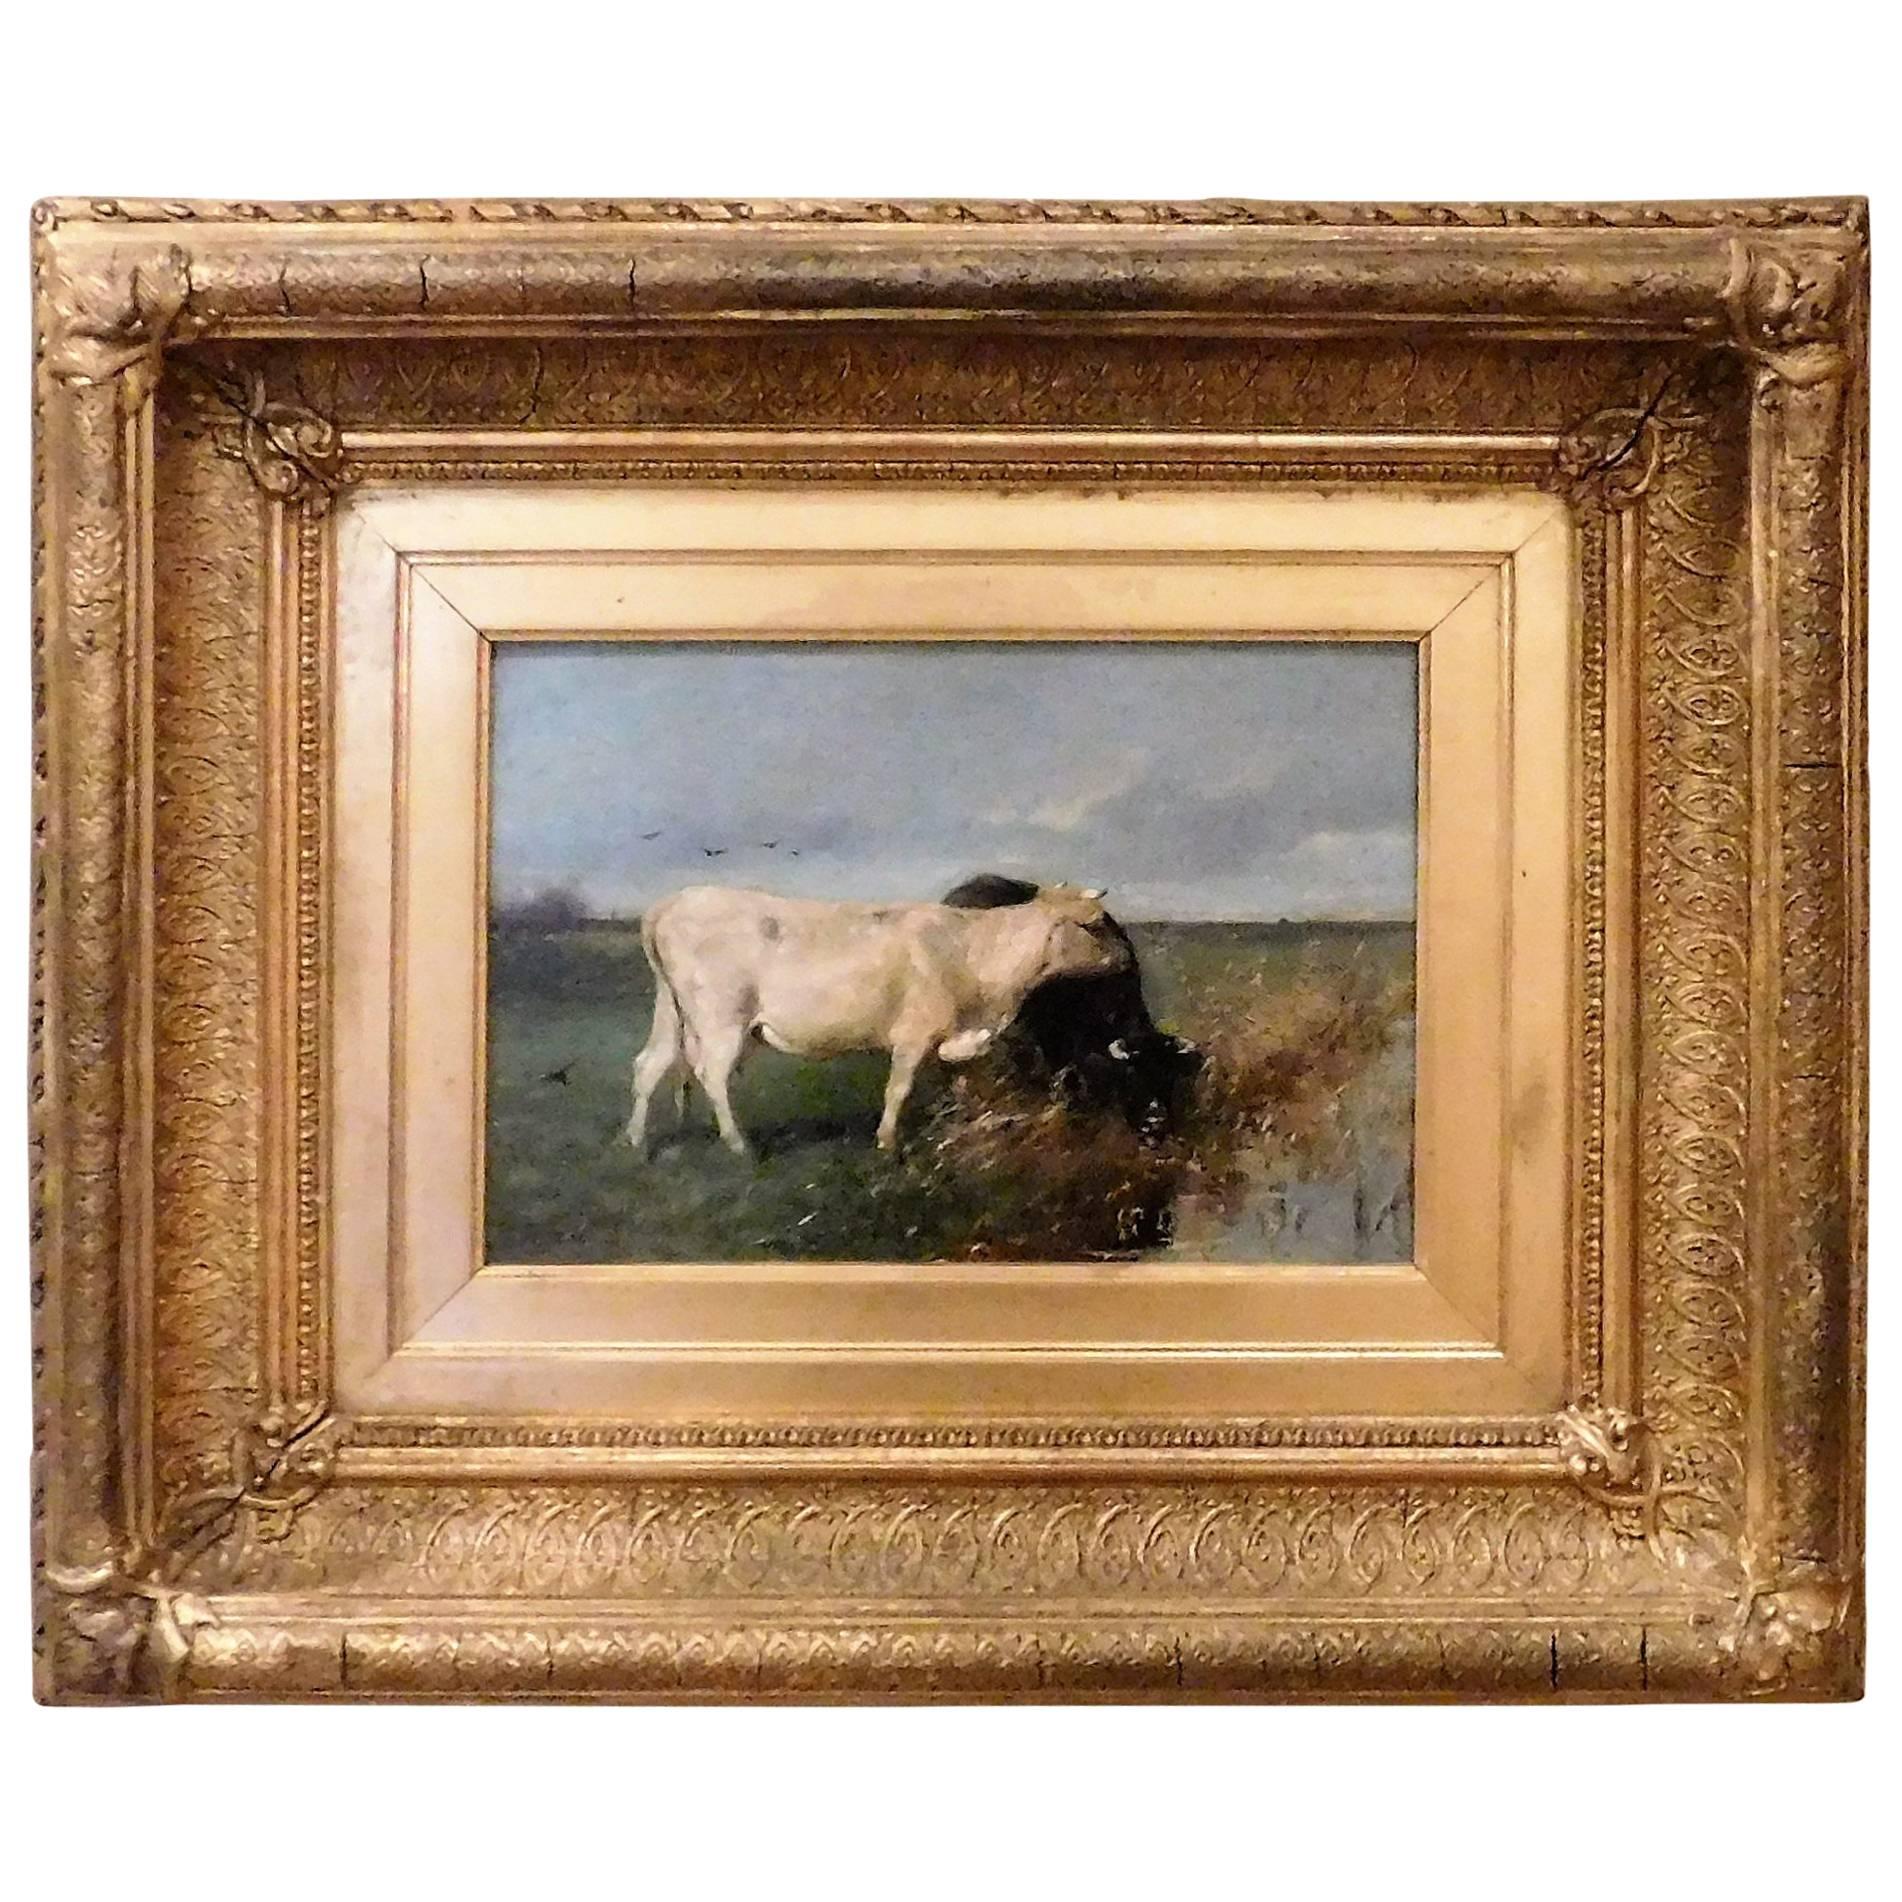 Oil on Canvas on Board, "Cows Watering" by Willem Maris